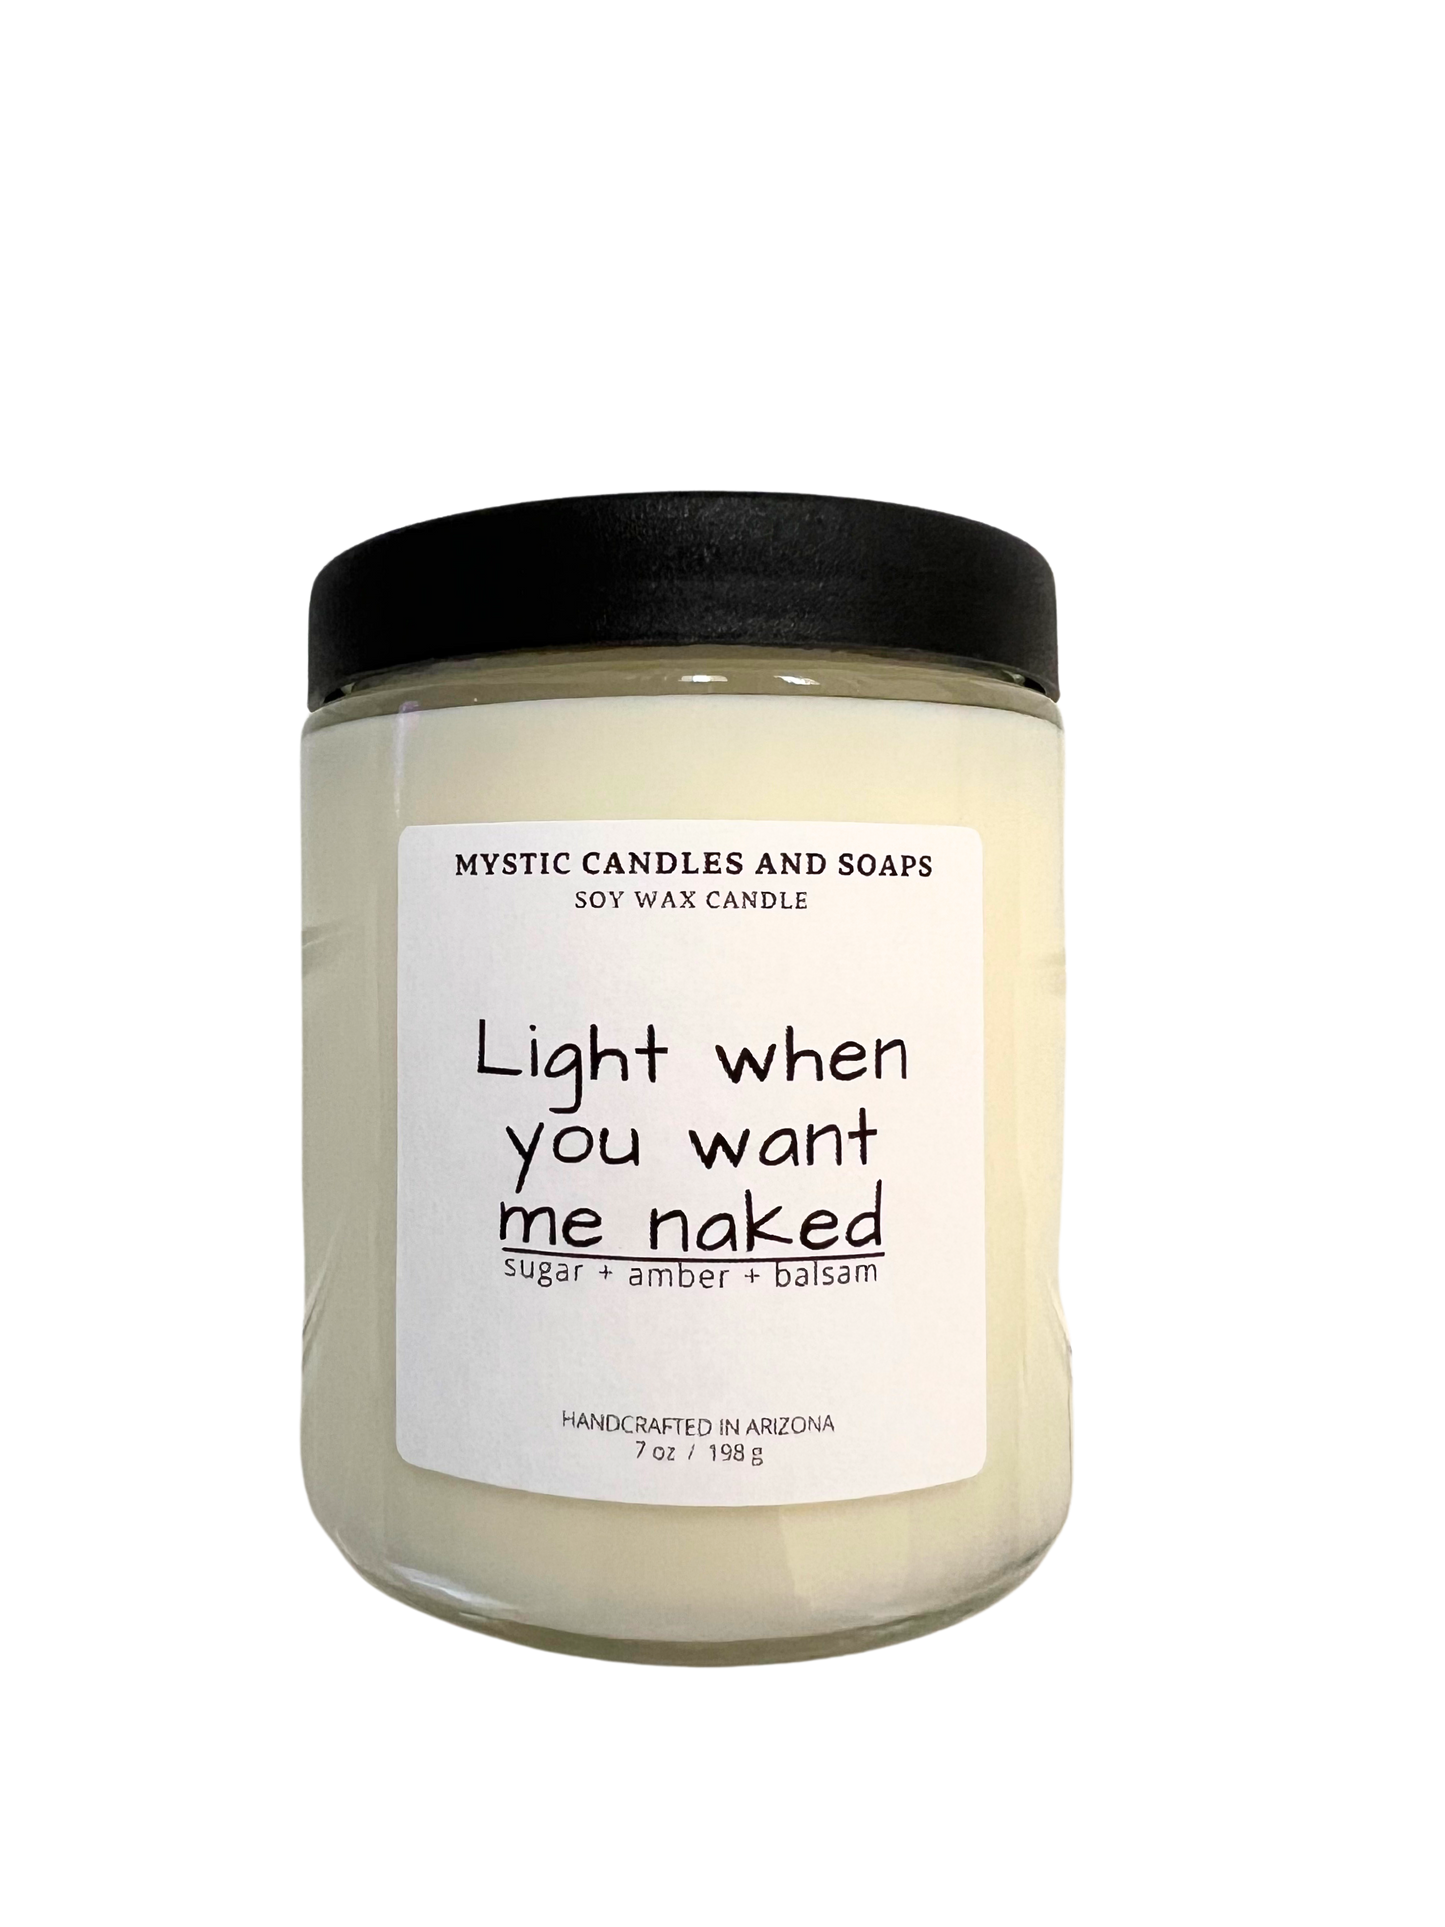 Funny label Light When You Want MNe Naked Candle